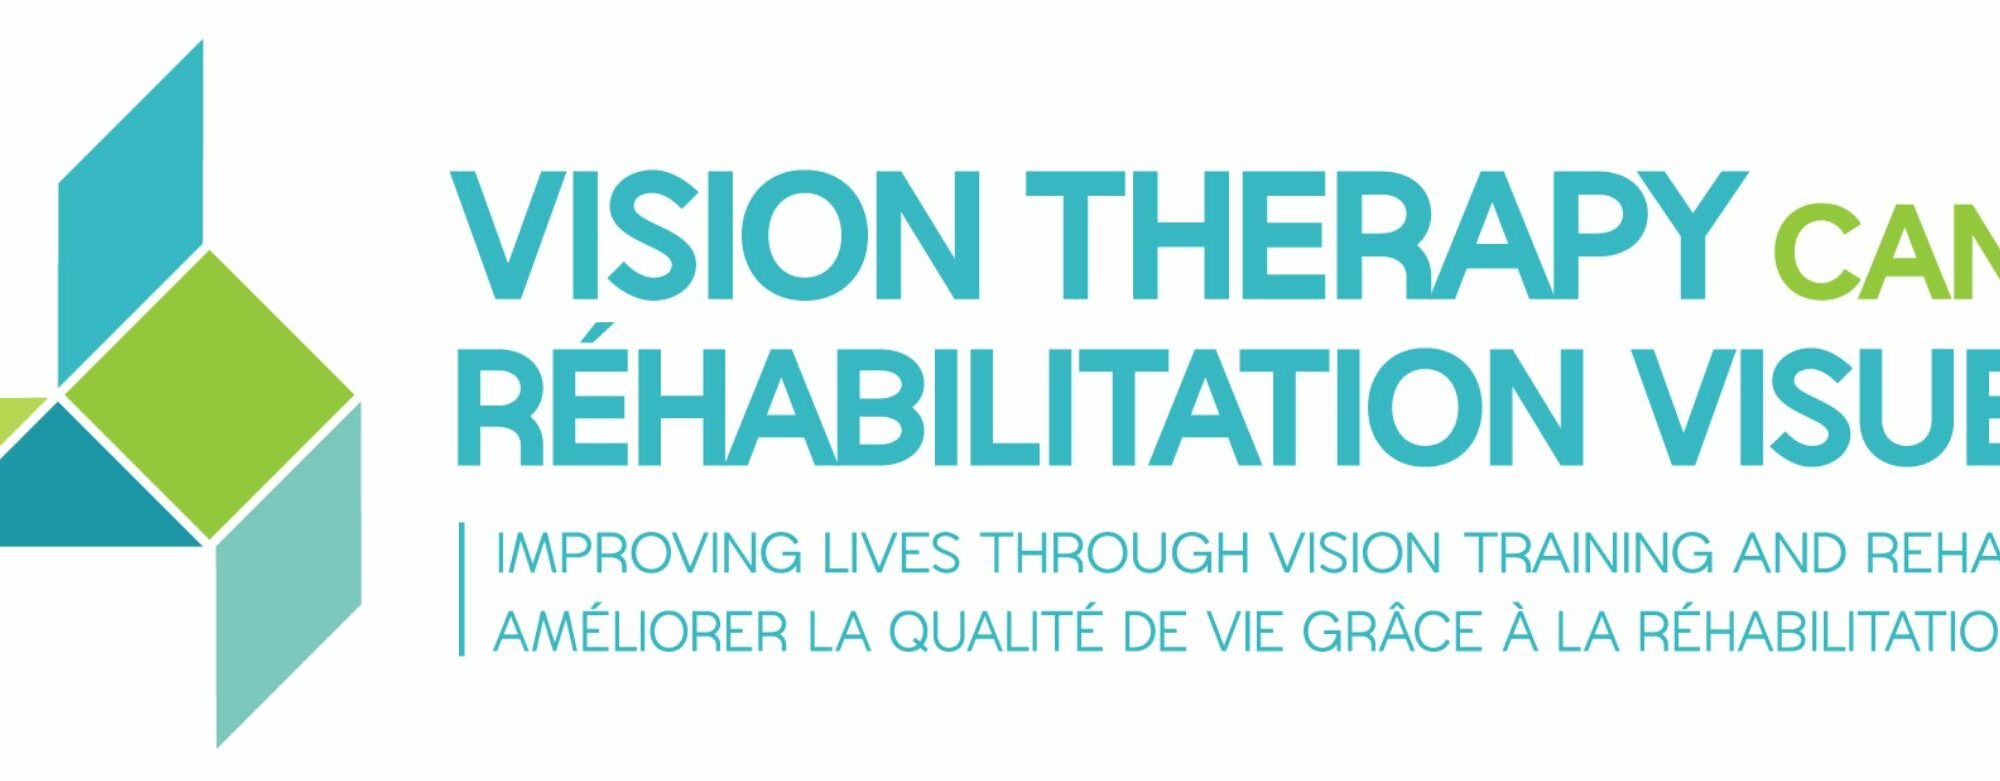 Vision Therapy Canada